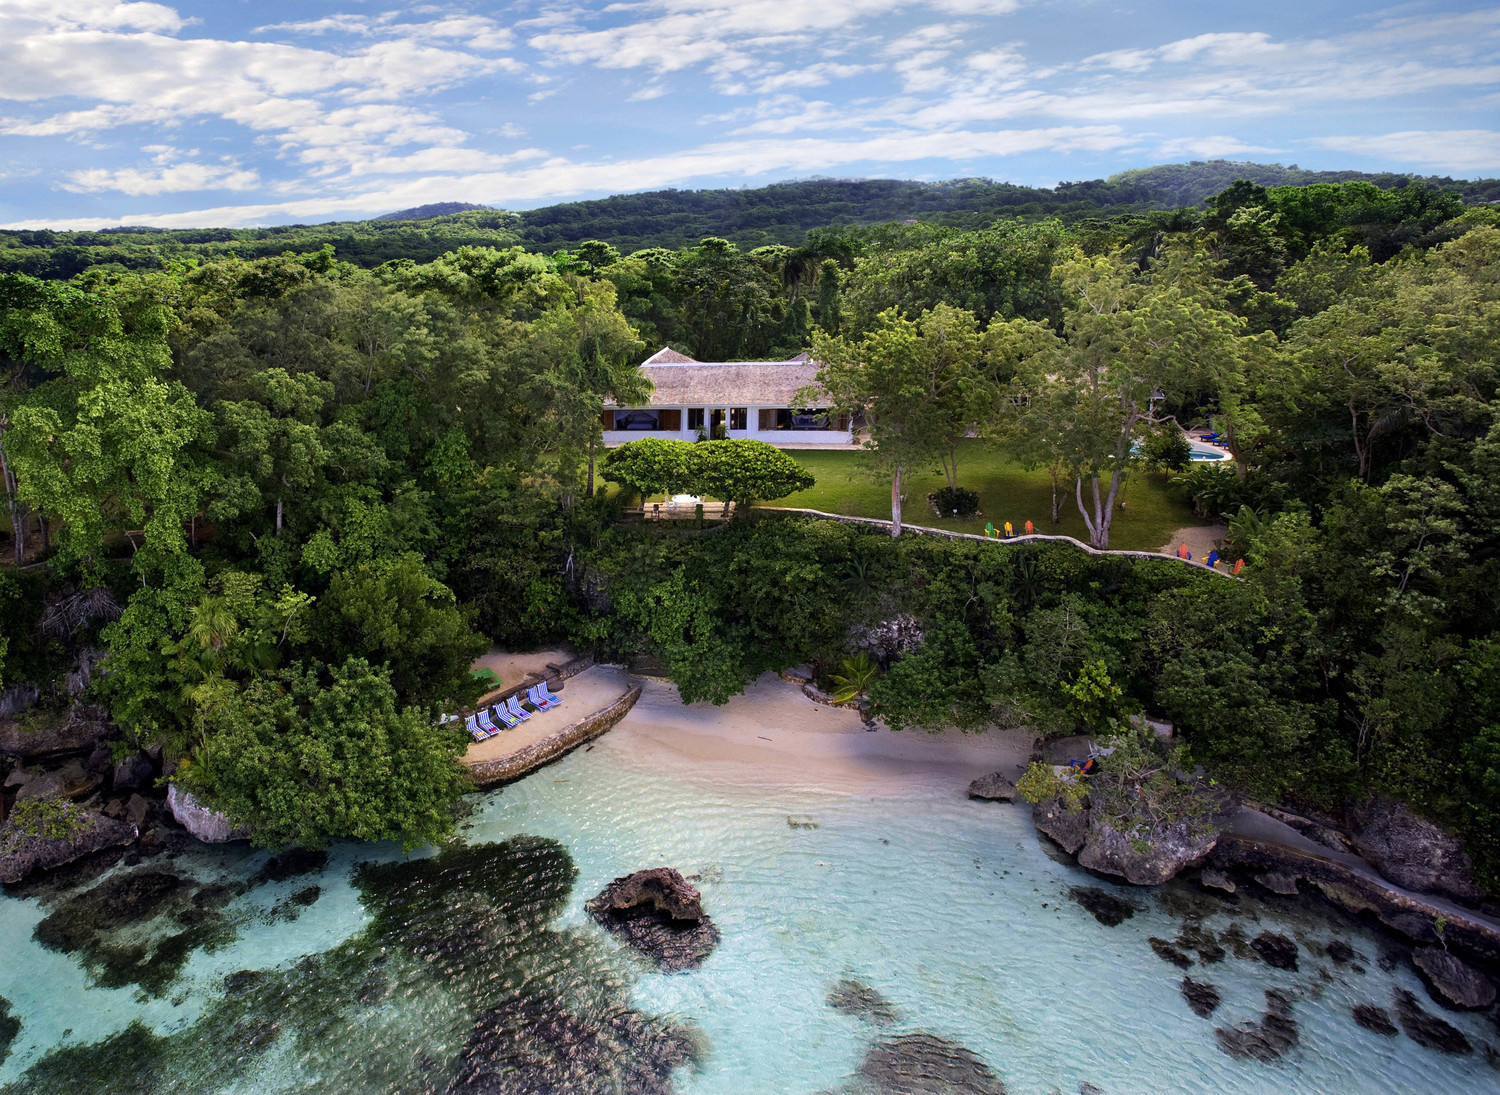 A visit to Jamaica during World War II inspired Ian Fleming to buy an estate there, which he called Goldeneye. Fleming wrote many of his 14 novels there and, long after Fleming’s death, it became the namesake of a Bond film.